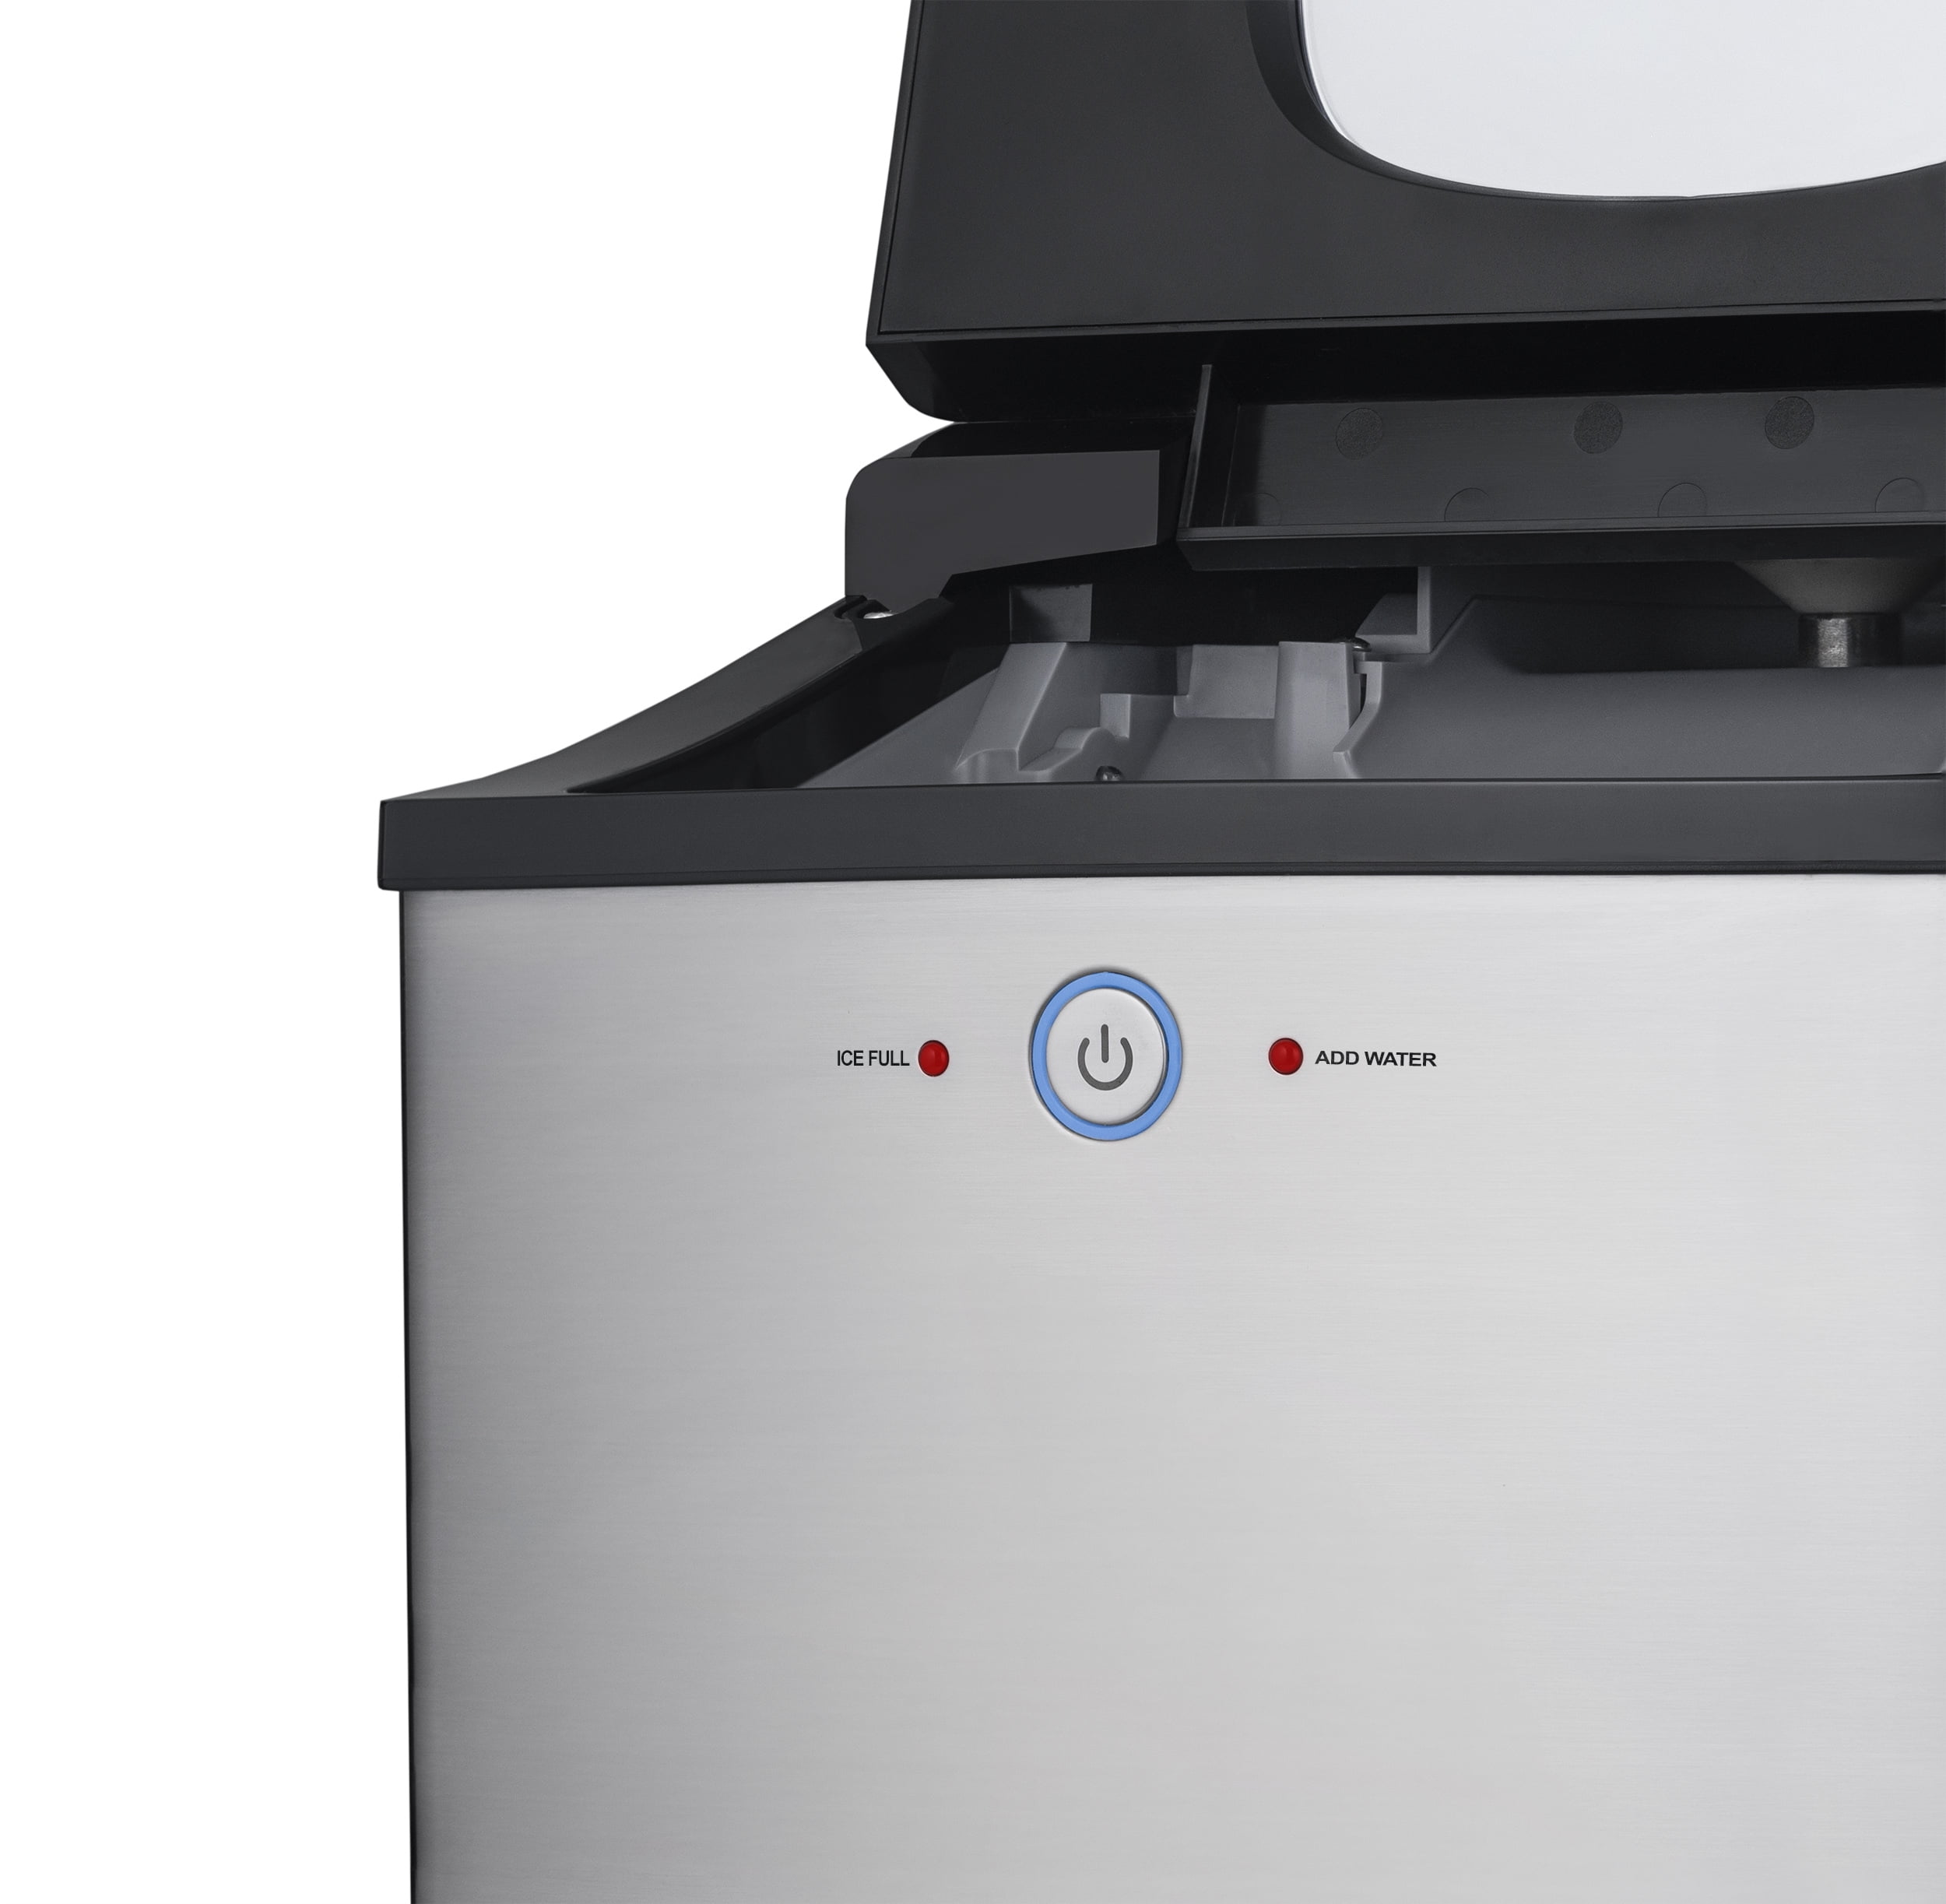 NewAir 40-lb Flip-up Door Countertop or Portable Nugget Ice Maker  (Stainless Steel) at